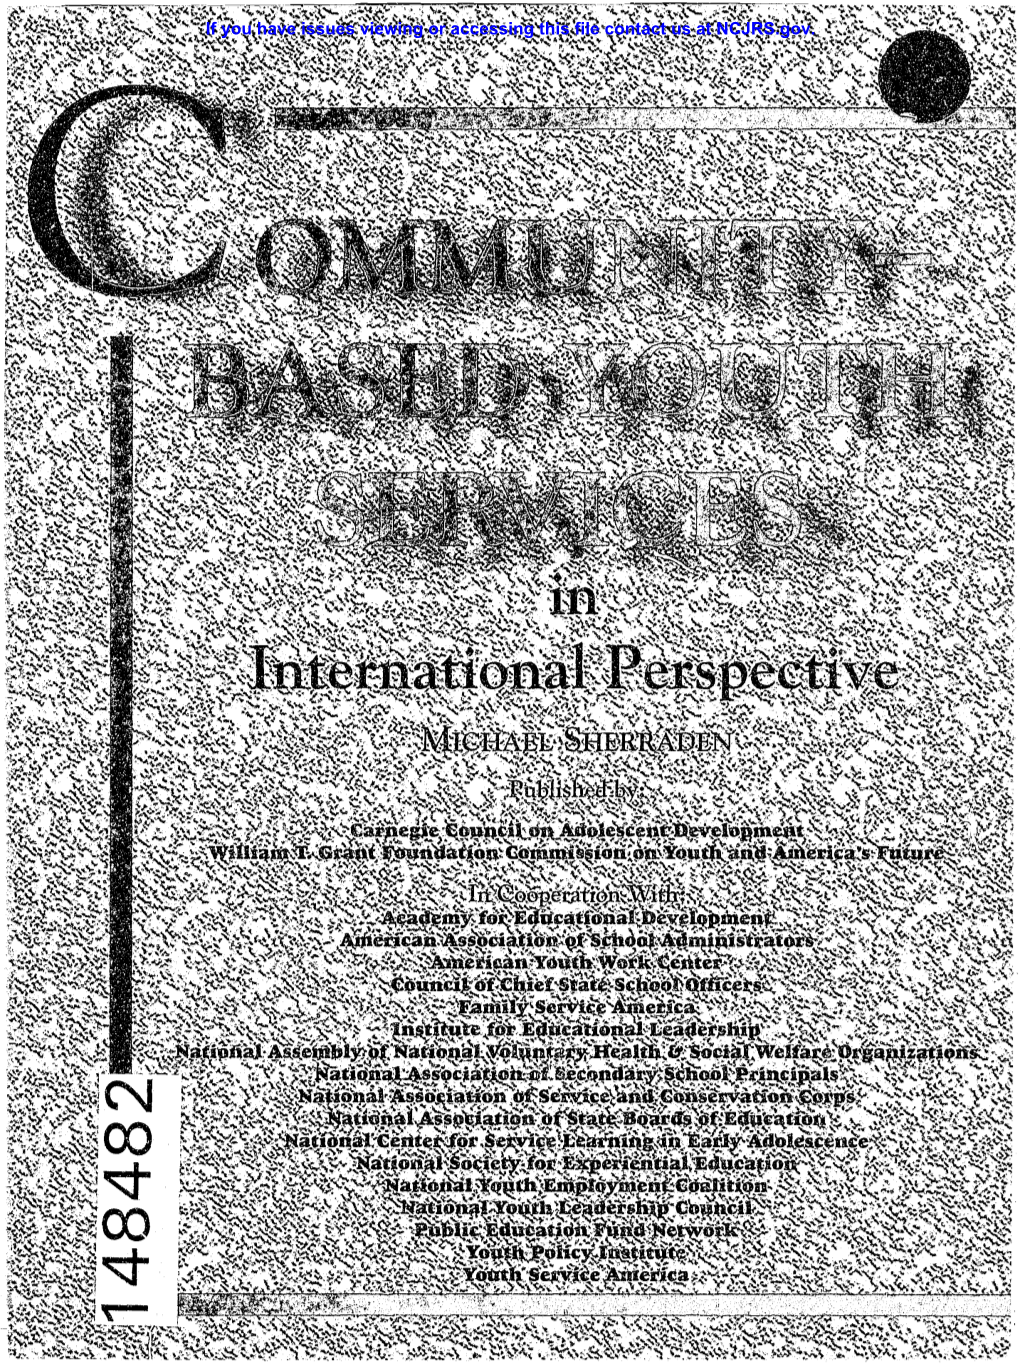 If You Have Issues Viewing Or Accessing This File Contact Us at NCJRS.Gov. COMMUNITY -- BASED YOUTH SERVICES In• International Perspective MICHAEL SHERRADEN